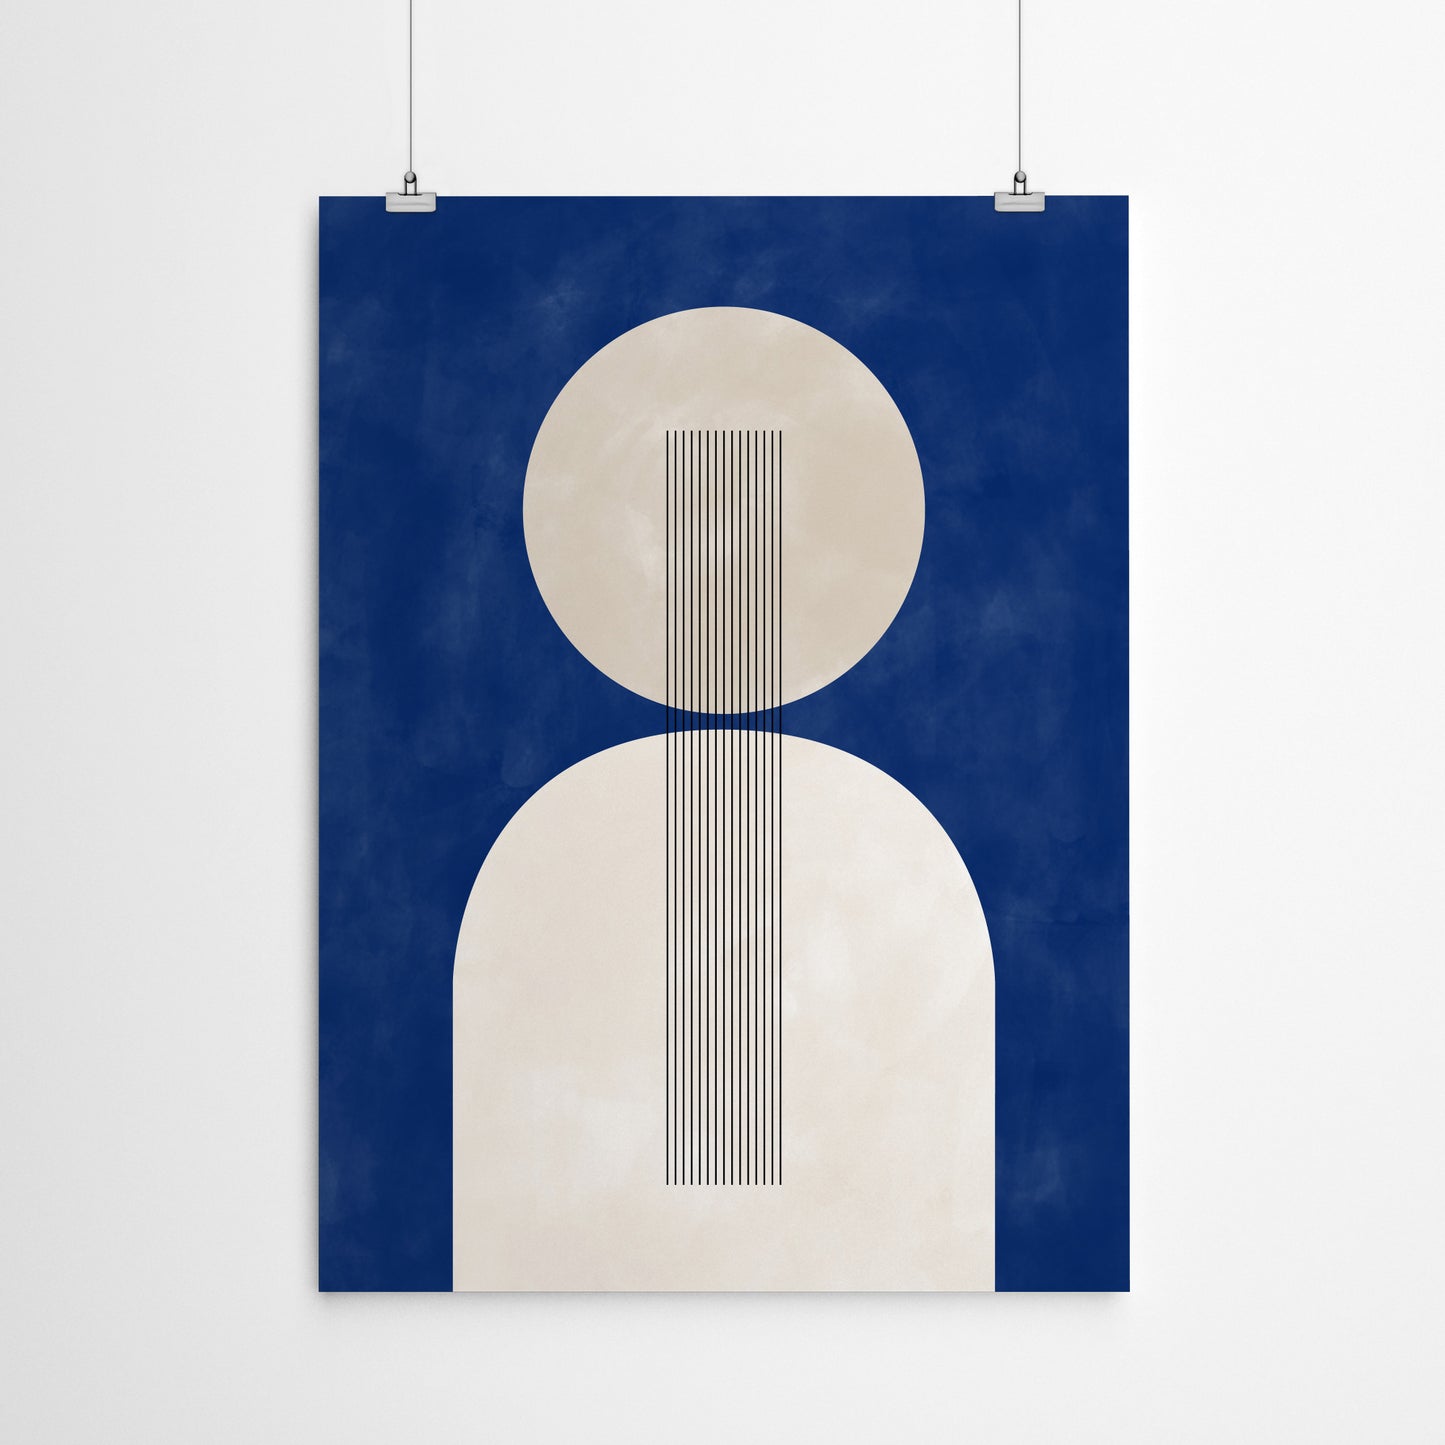 Royal Blue Line Matisse 2 by The Print Republic - Canvas, Poster or Framed Print